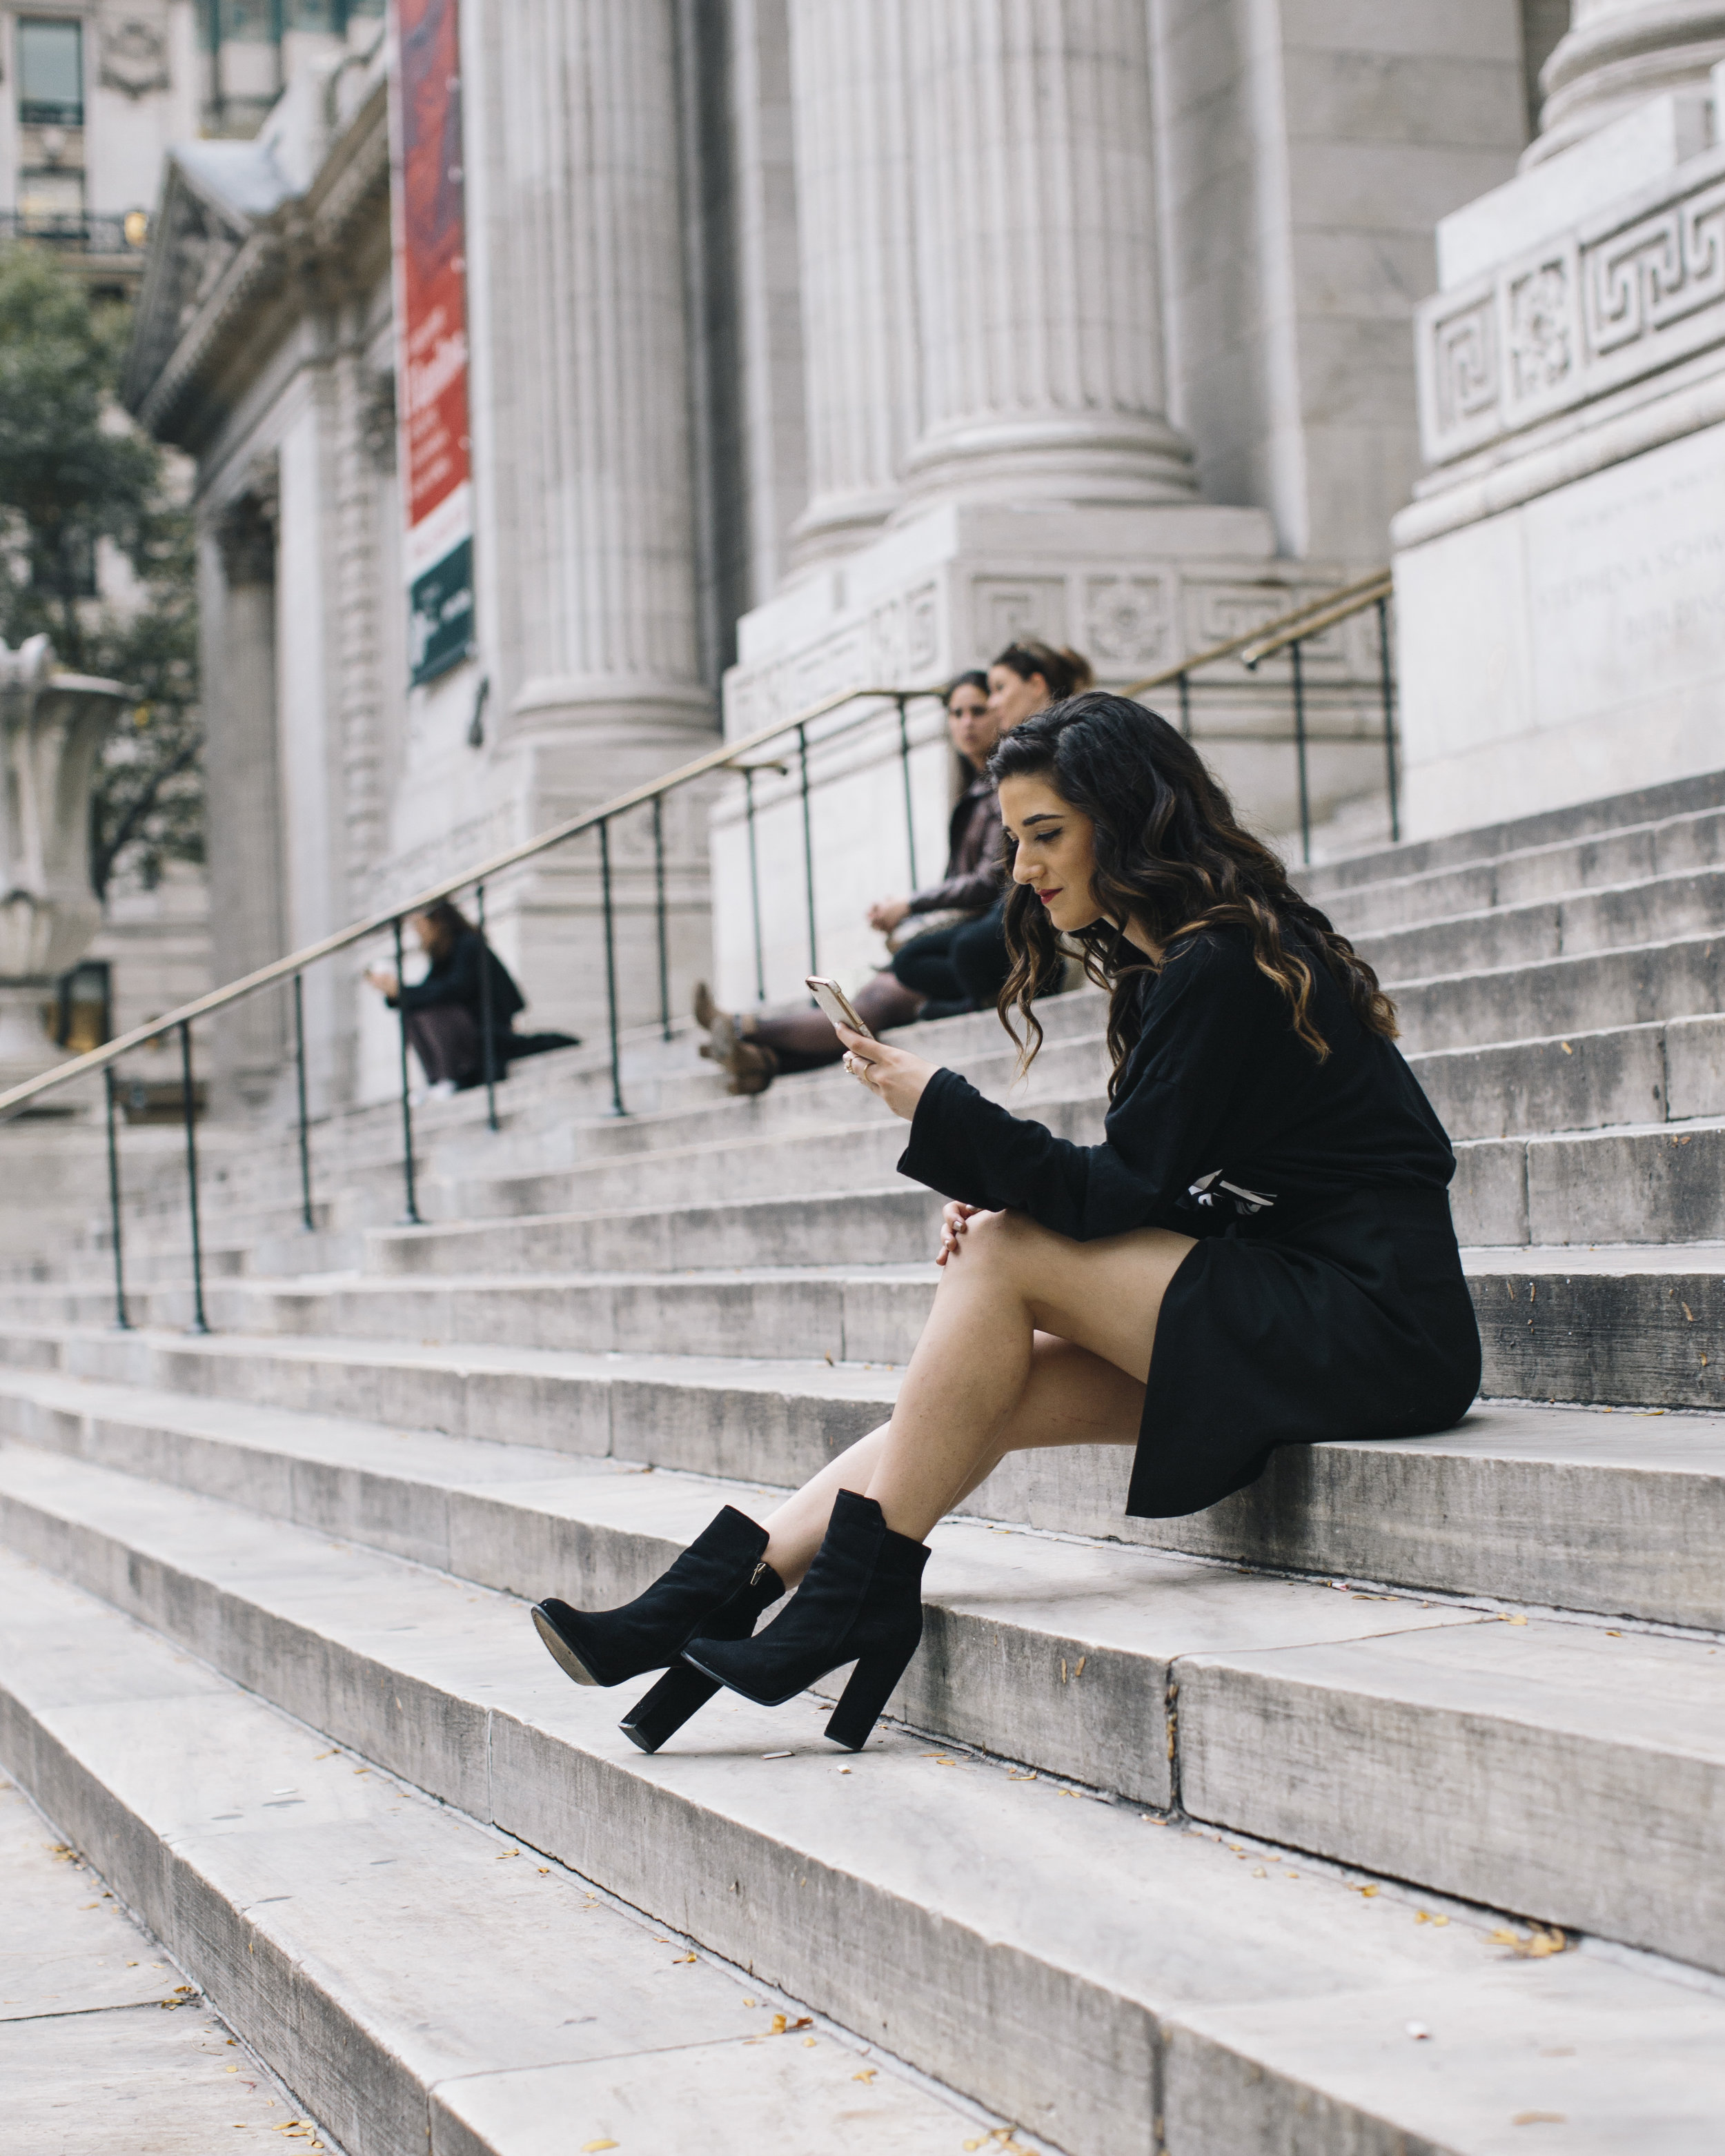 All Black Look What To Do When You Have Nothing To Wear Louboutins & Love Fashion Blog Esther Santer NYC Street Style Blogger Outfit OOTD Trendy Braid Hairstyle Inspo Monochrome Hair Beautiful Pretty Photoshoot Model Fall Women Girls Zara Wrap Skirt.jpg